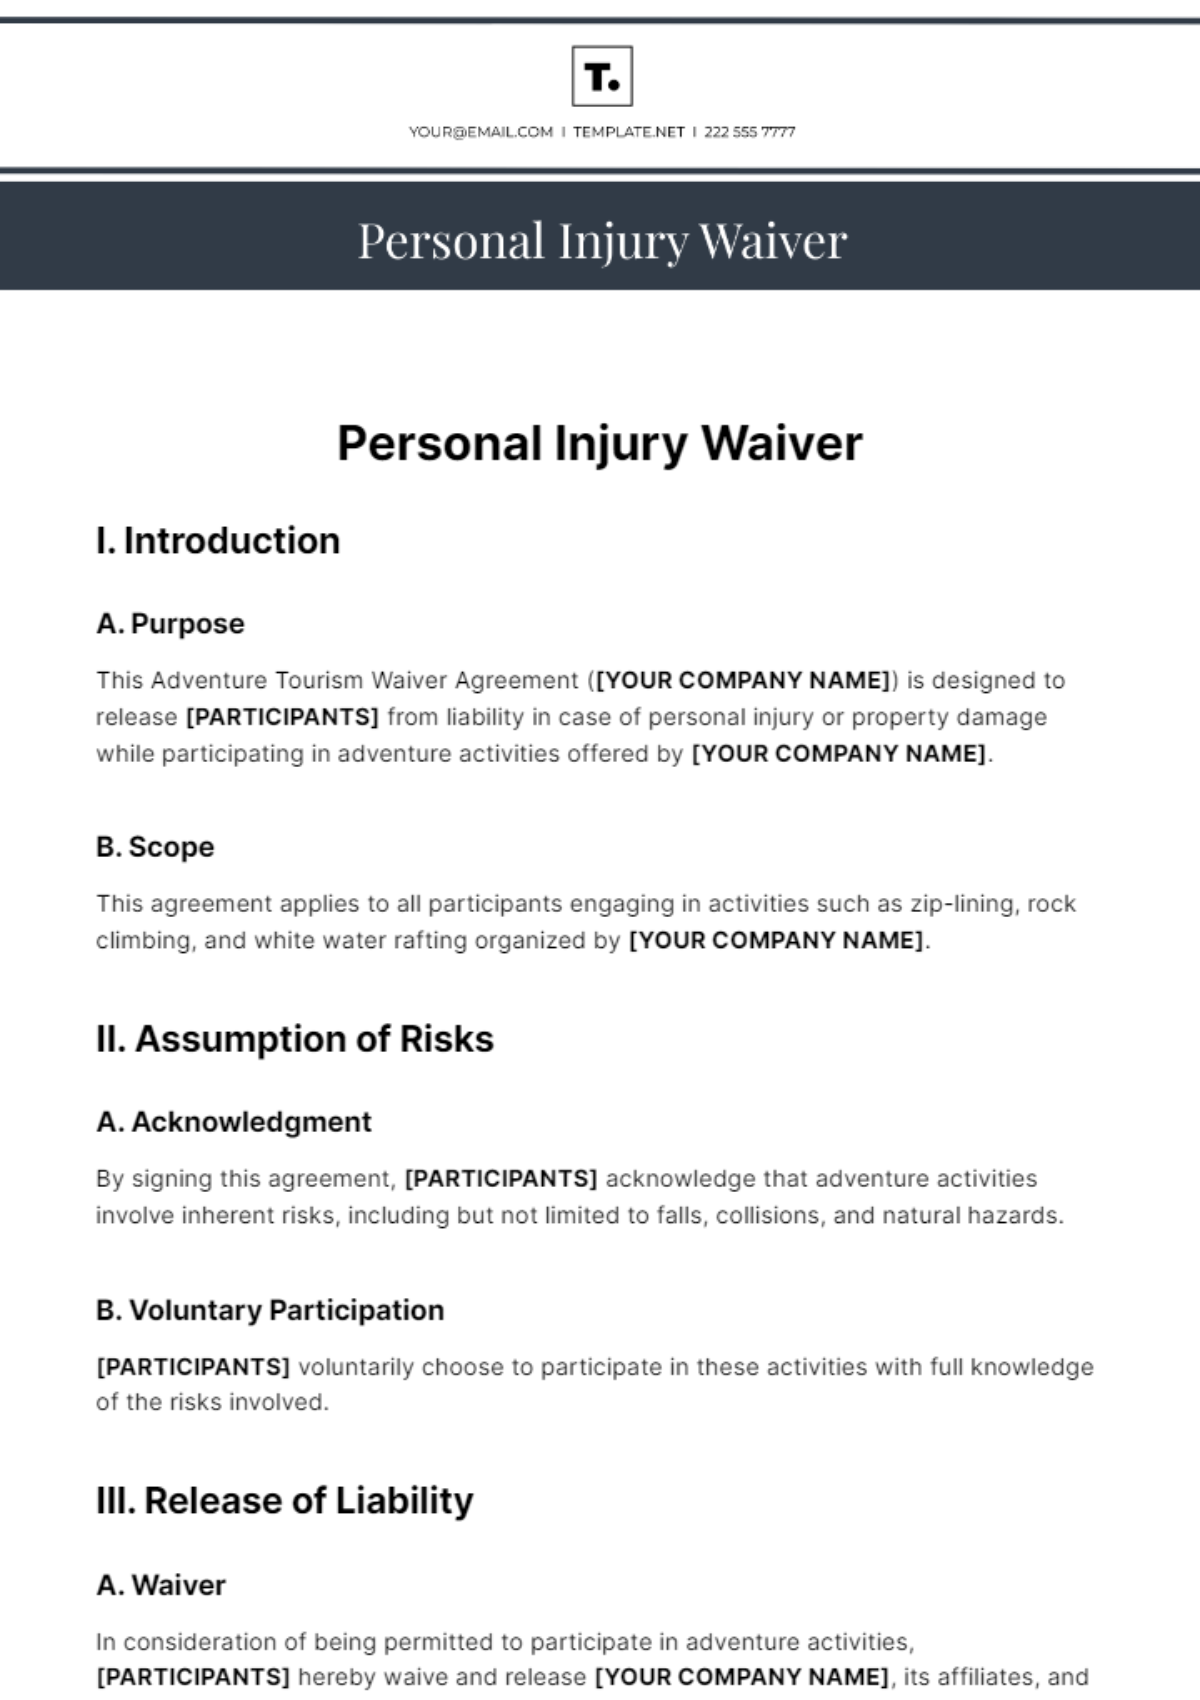 Free Personal Injury Waiver Template